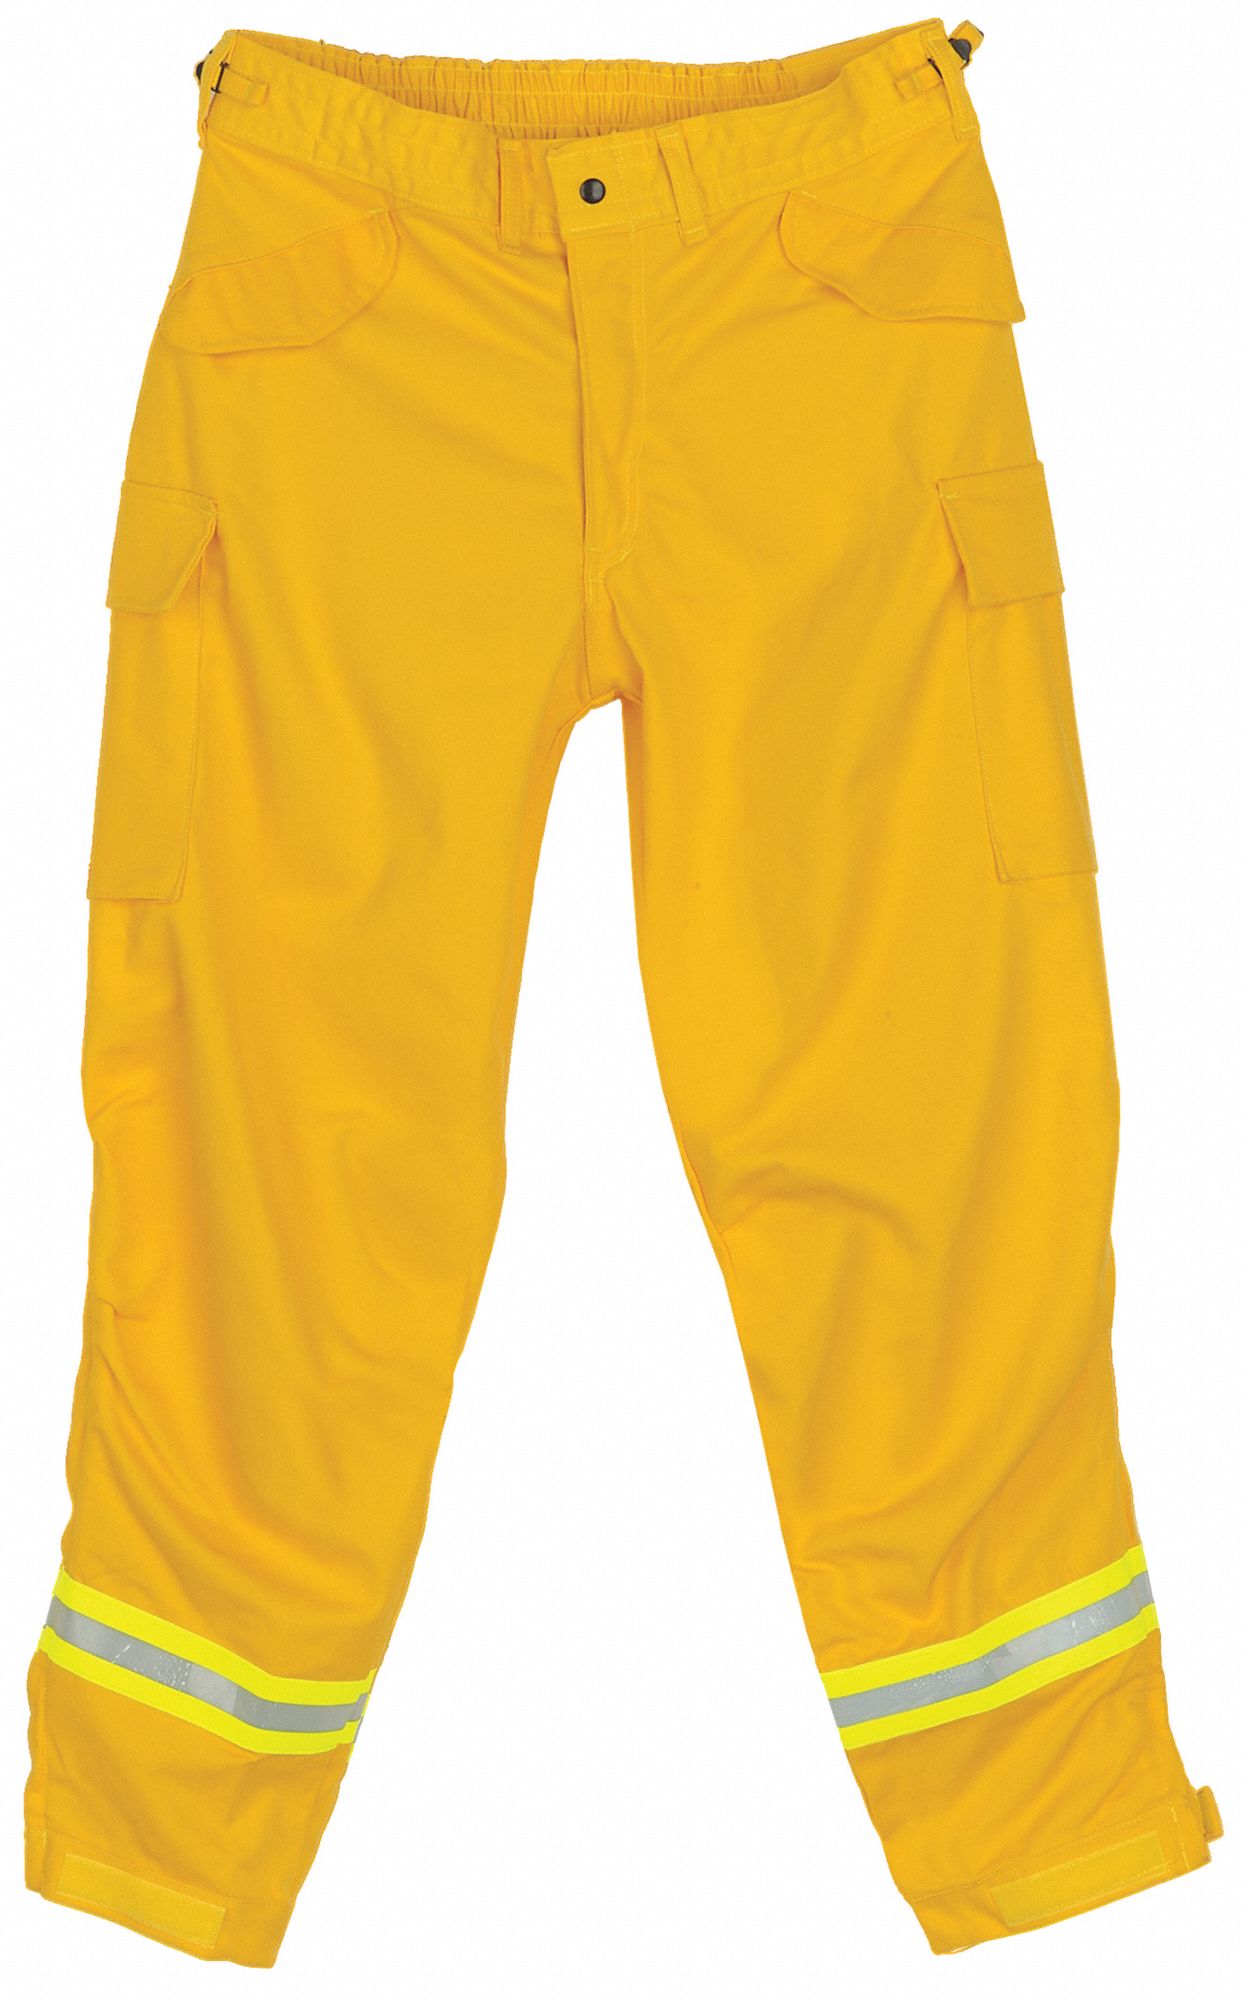 9 oz Indura Ultra Soft Wildland Fire Over Pants, Yellow, 32 in Inseam, Fits Waist Size 31 to 35 in